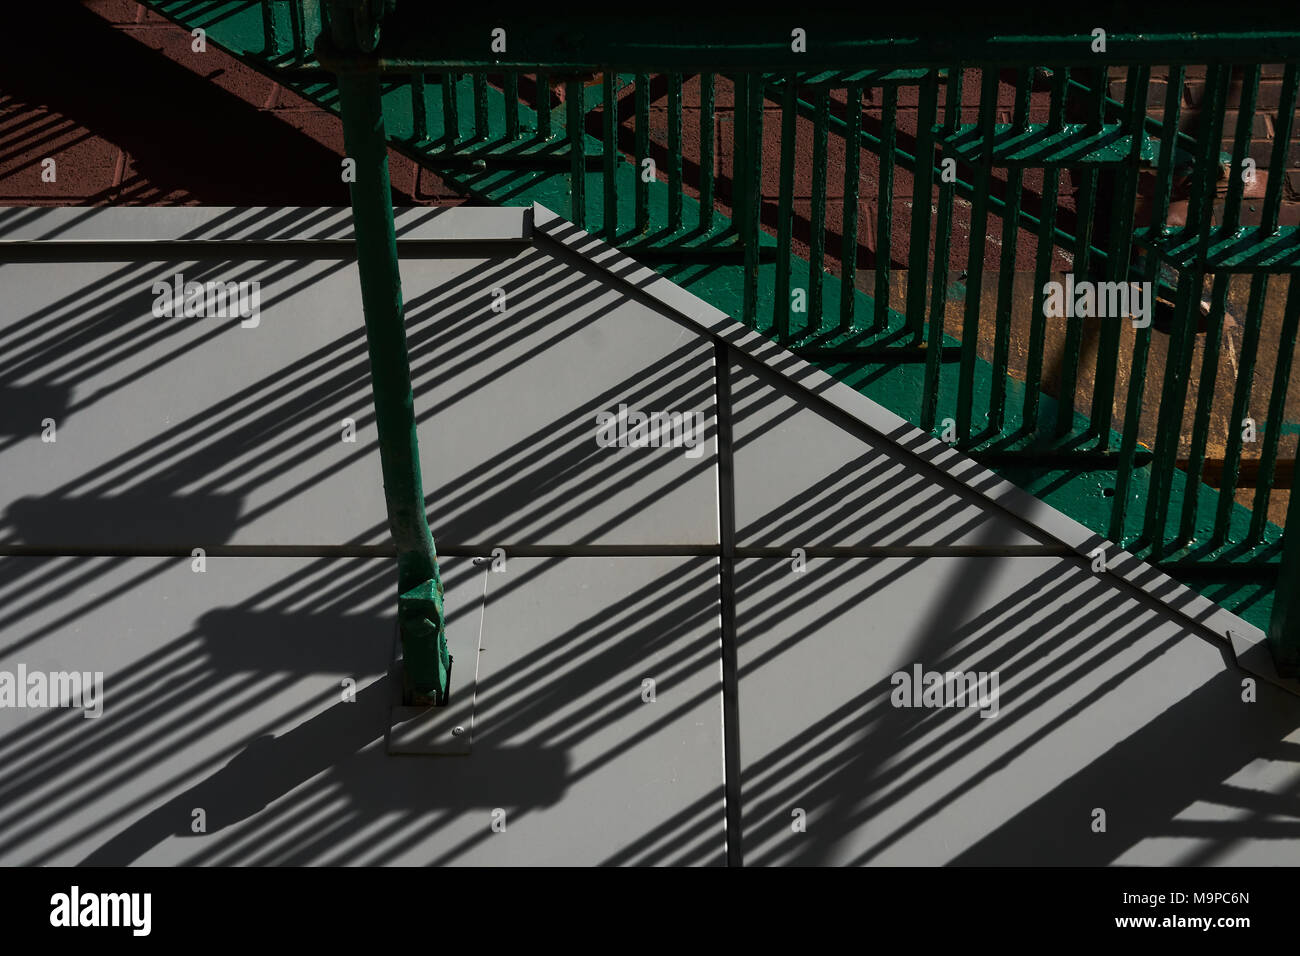 Cast diagonal line shadow patterns from a iron railing onto a sidewalk Stock Photo